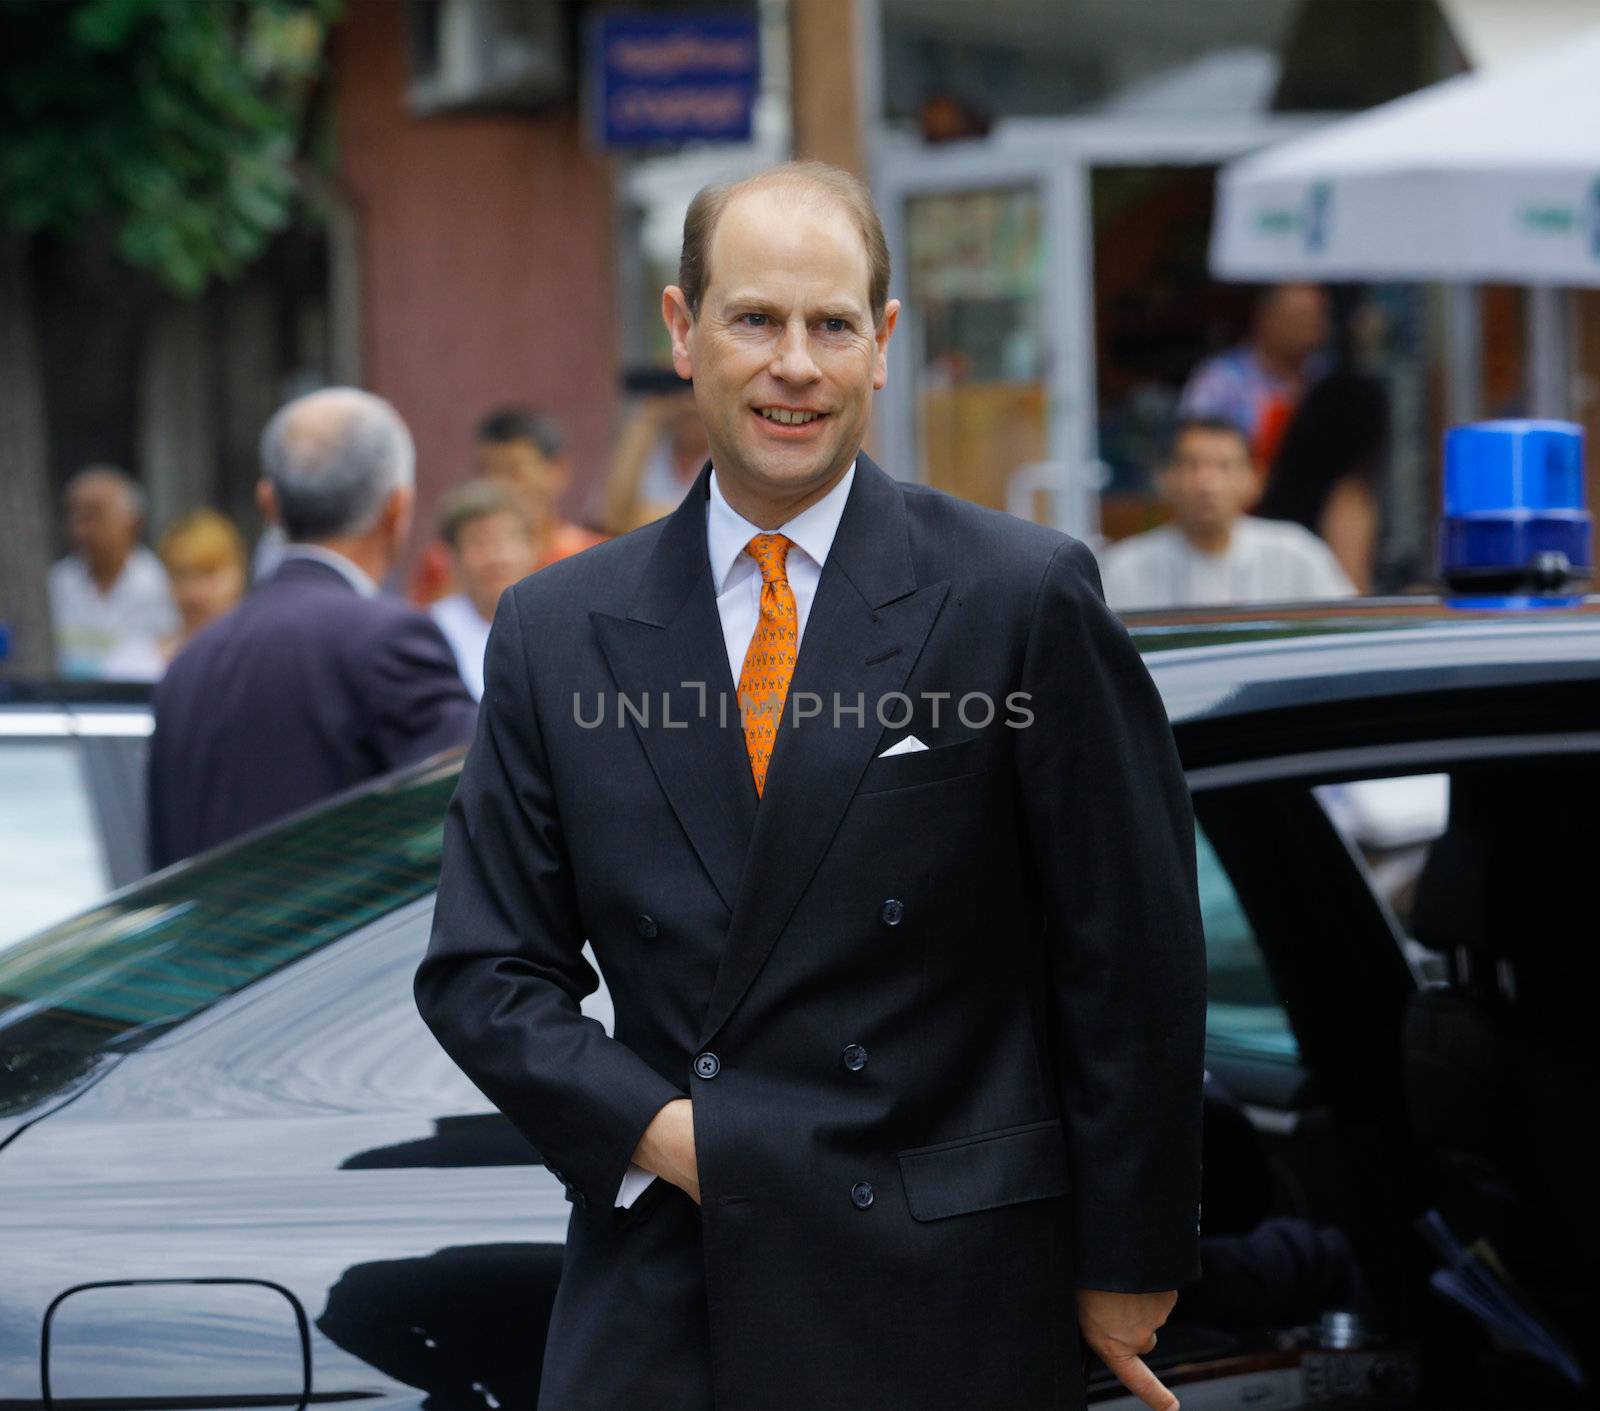 Sofia; Bulgaria - June 24, 2013: Britain's Prince Edward is visiting Bulgaria, on the invitation of the country's President Rosen Plevneliev.